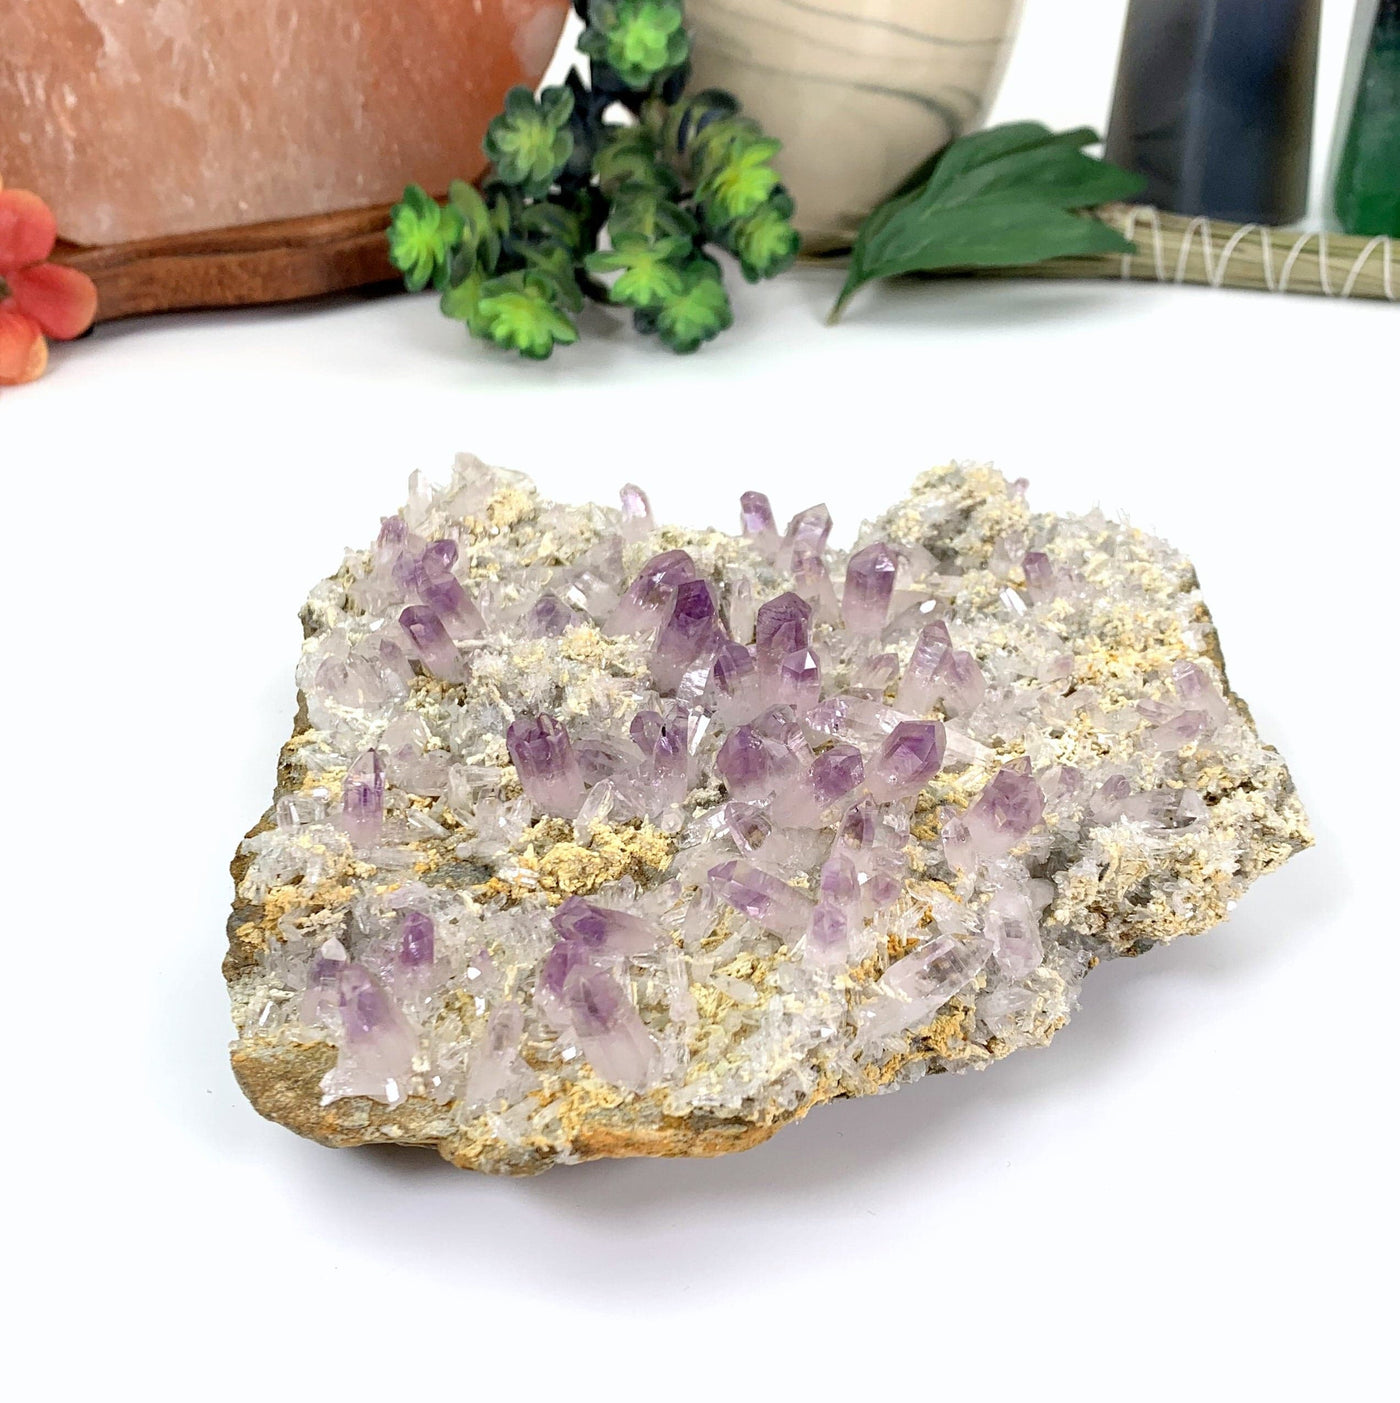 Veracruz amethyst cluster on white background.  It  light purple points scattered on a rock background that is tones of grey white and tan.  Tiny light purple points surround the large points.